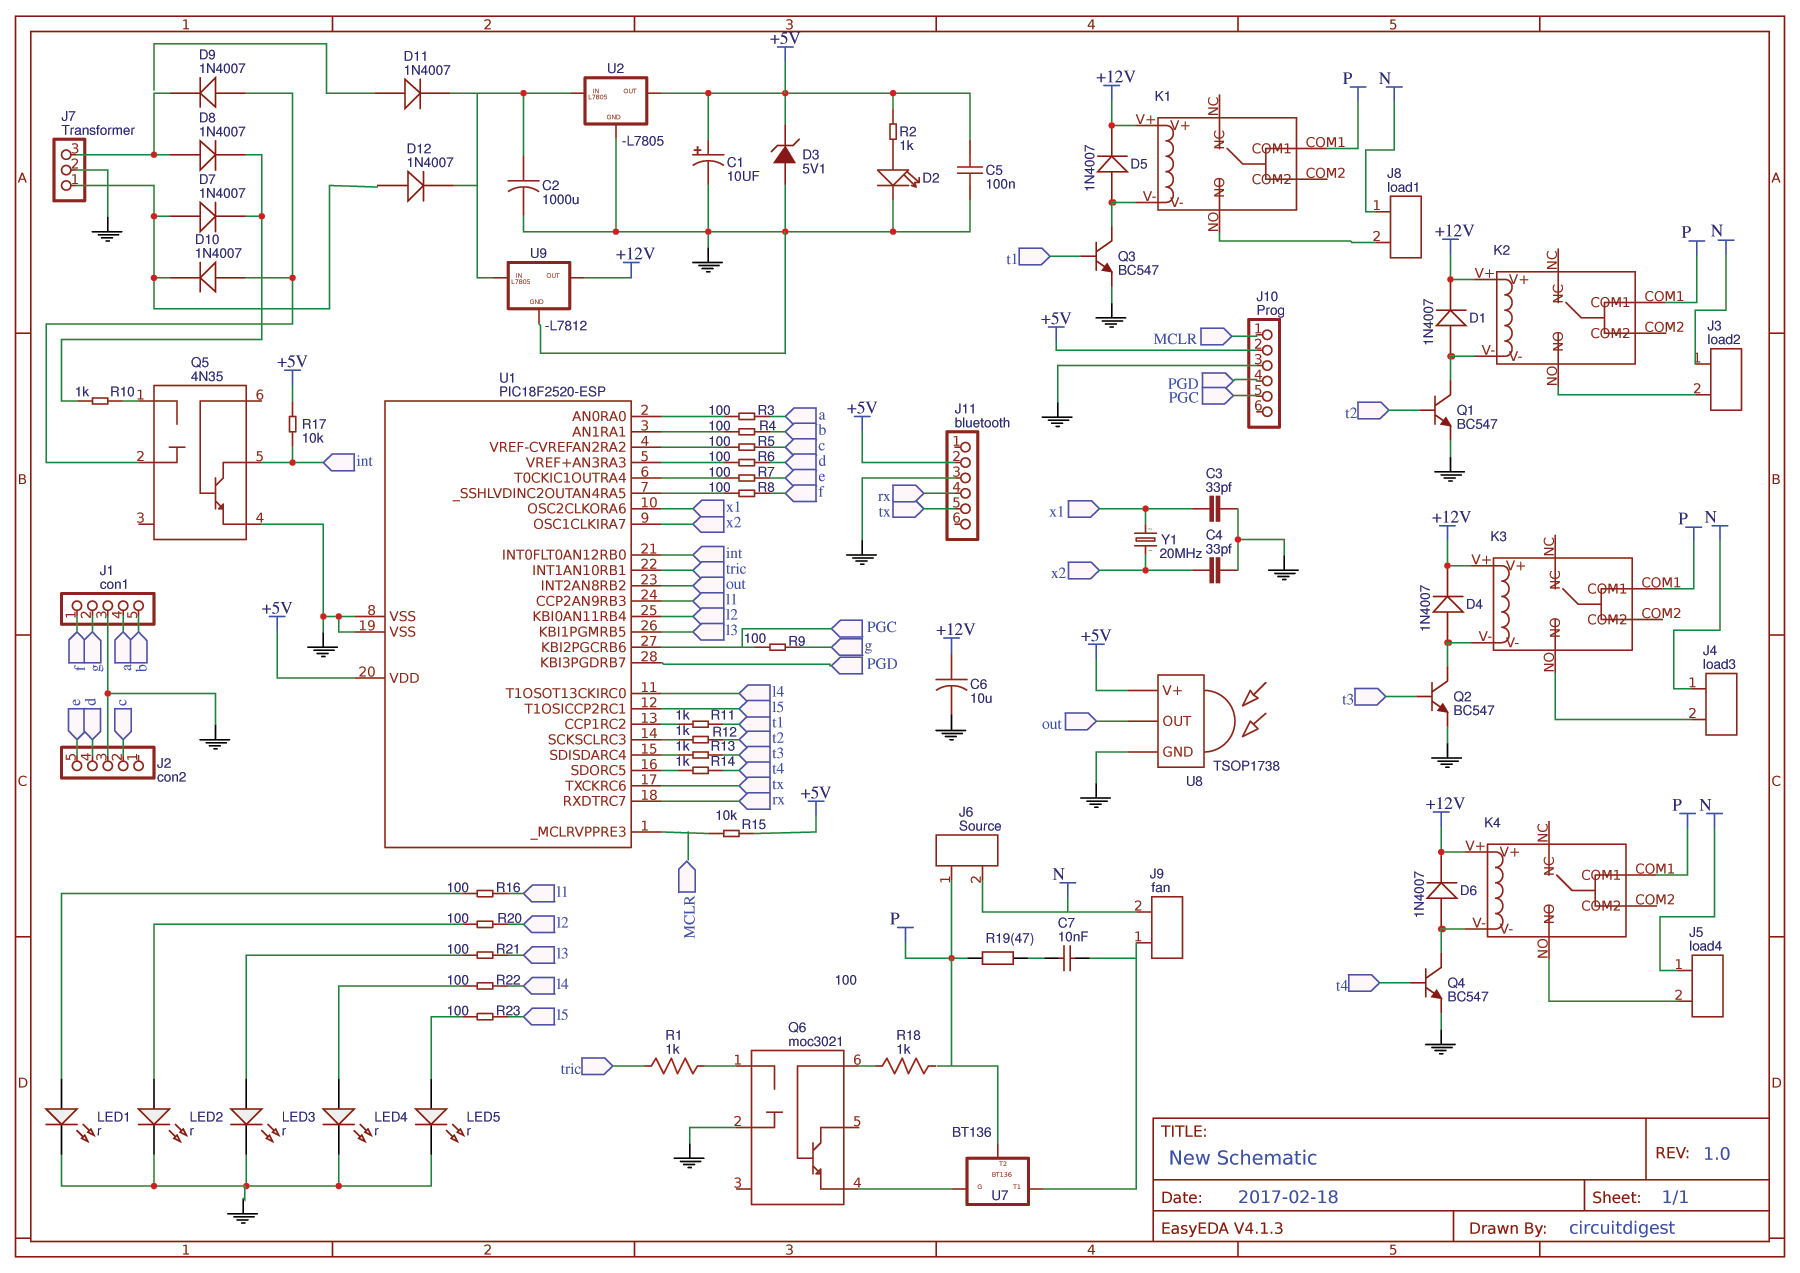 Circuit Diagram for PIC Microcontroller Based Remote Controlled Home Automation